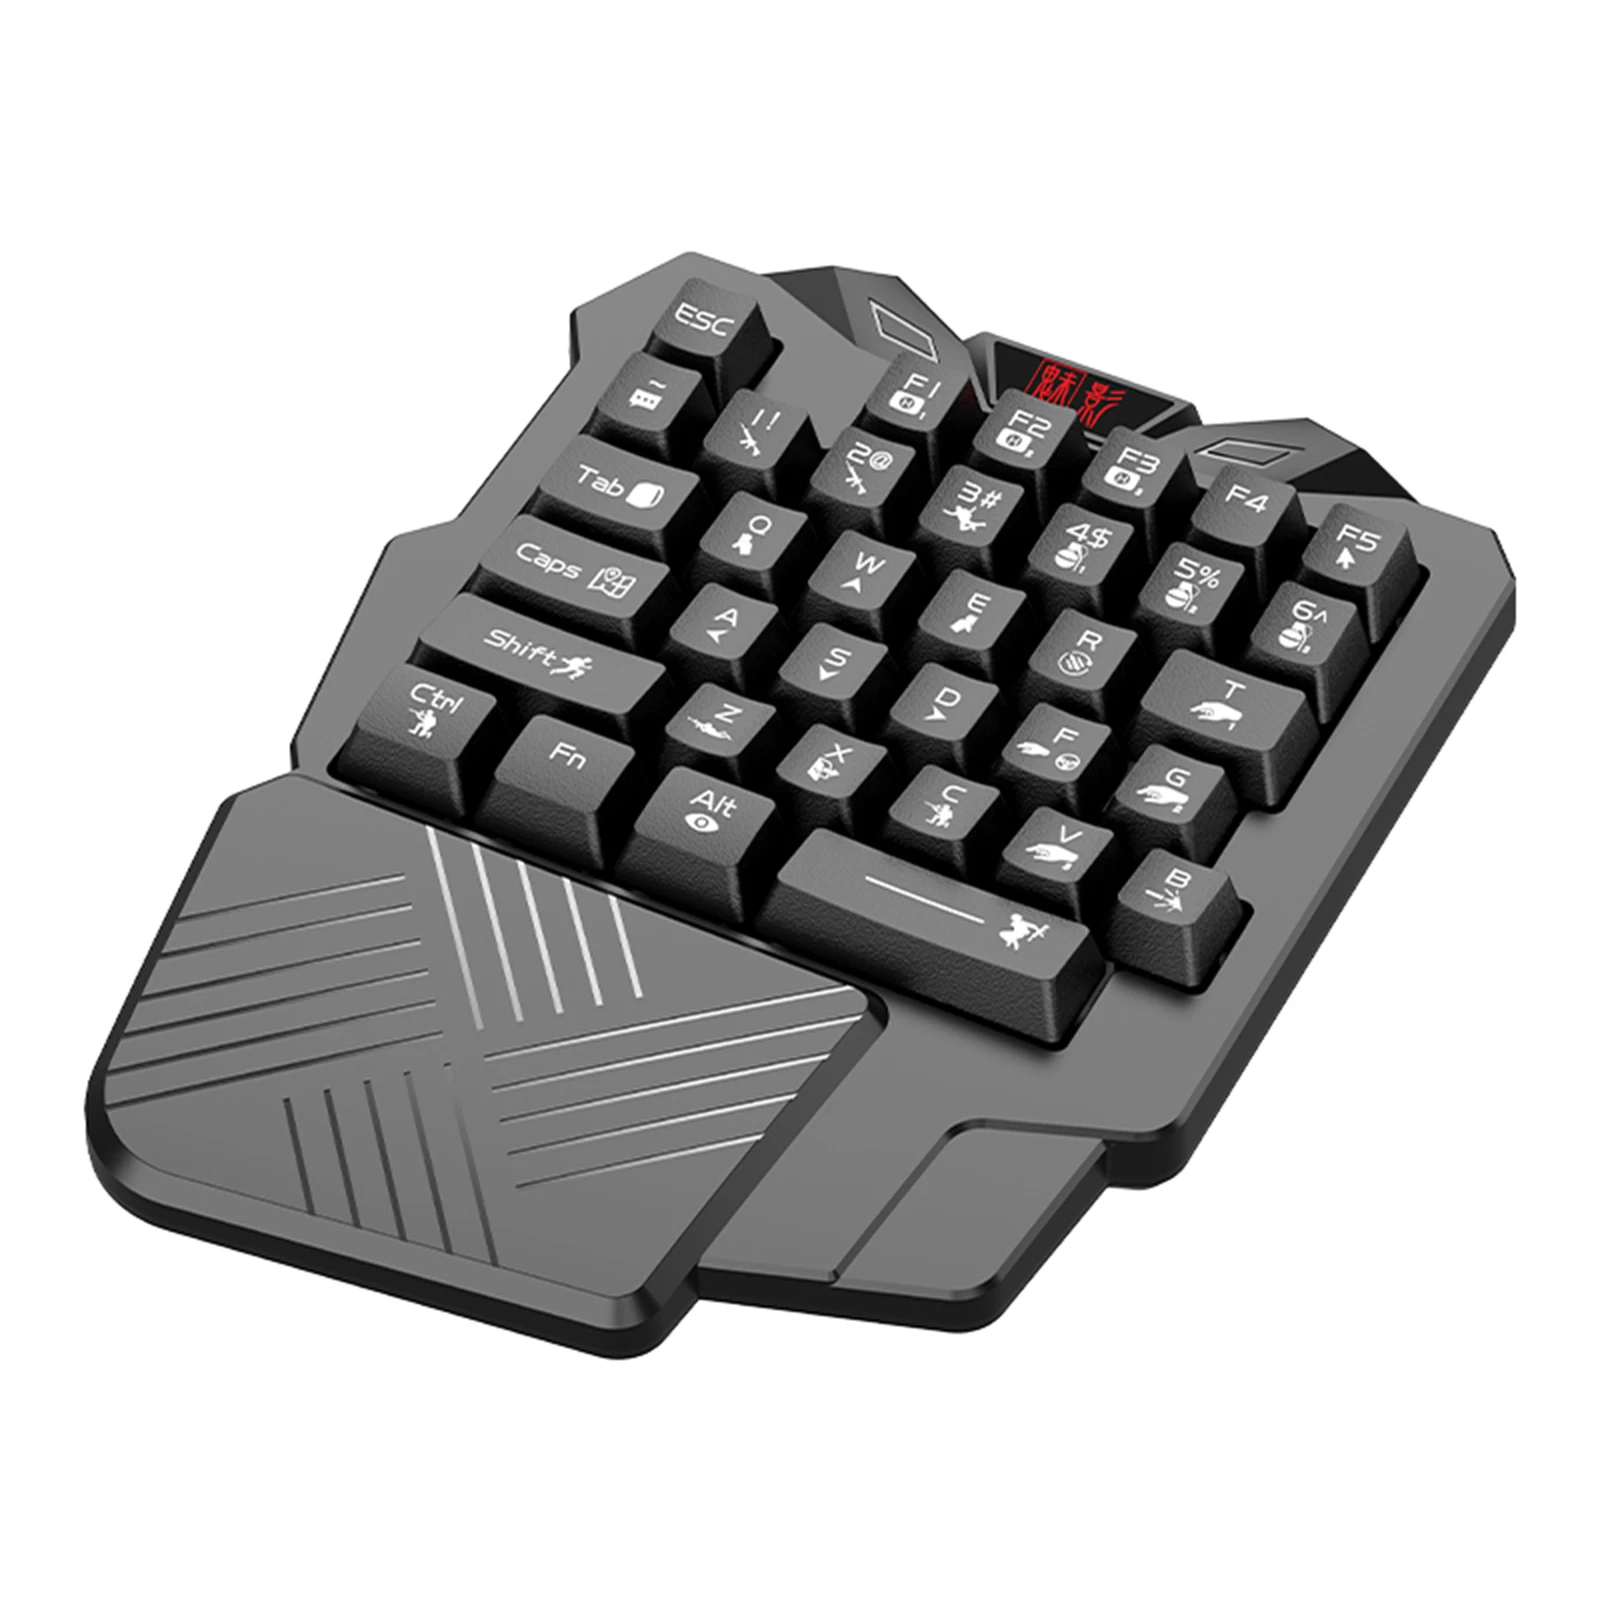 Mini Single Hand Professional Gaming Keyboard 35 Keys USB Wired for PC Games